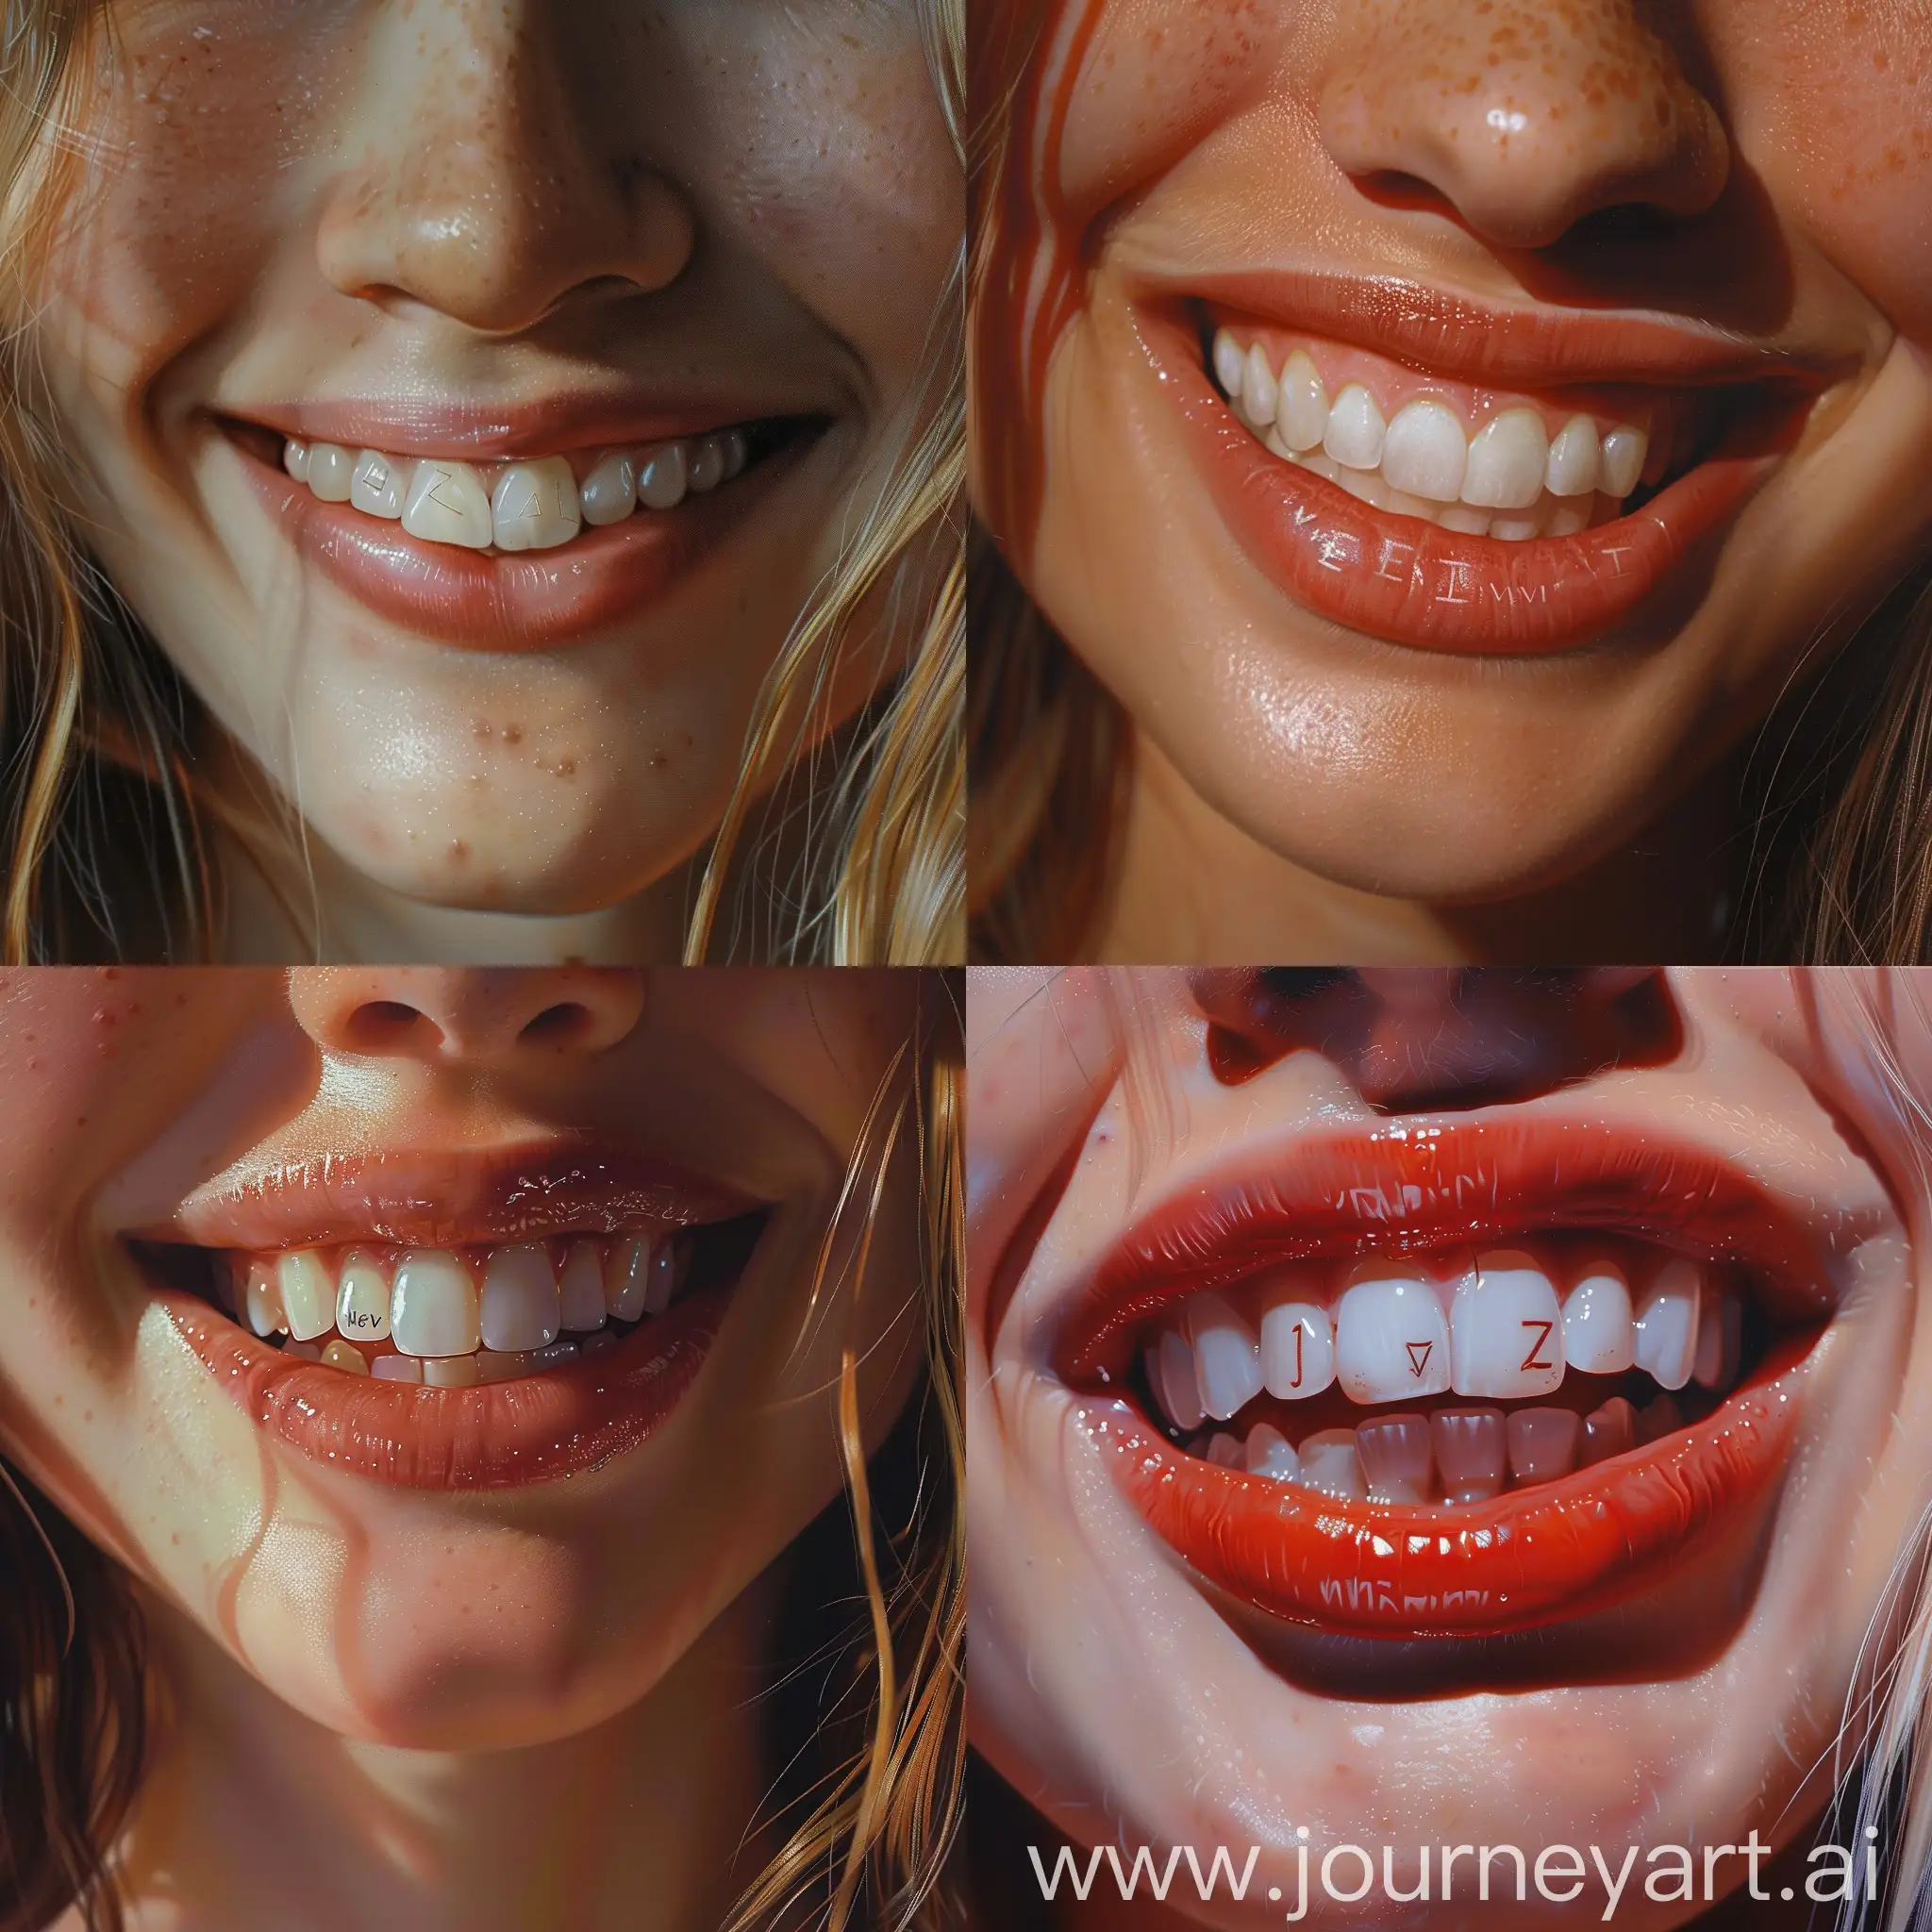 CloseUp-Portrait-of-Girl-Smiling-with-NevZ-and-AI-Written-on-Teeth